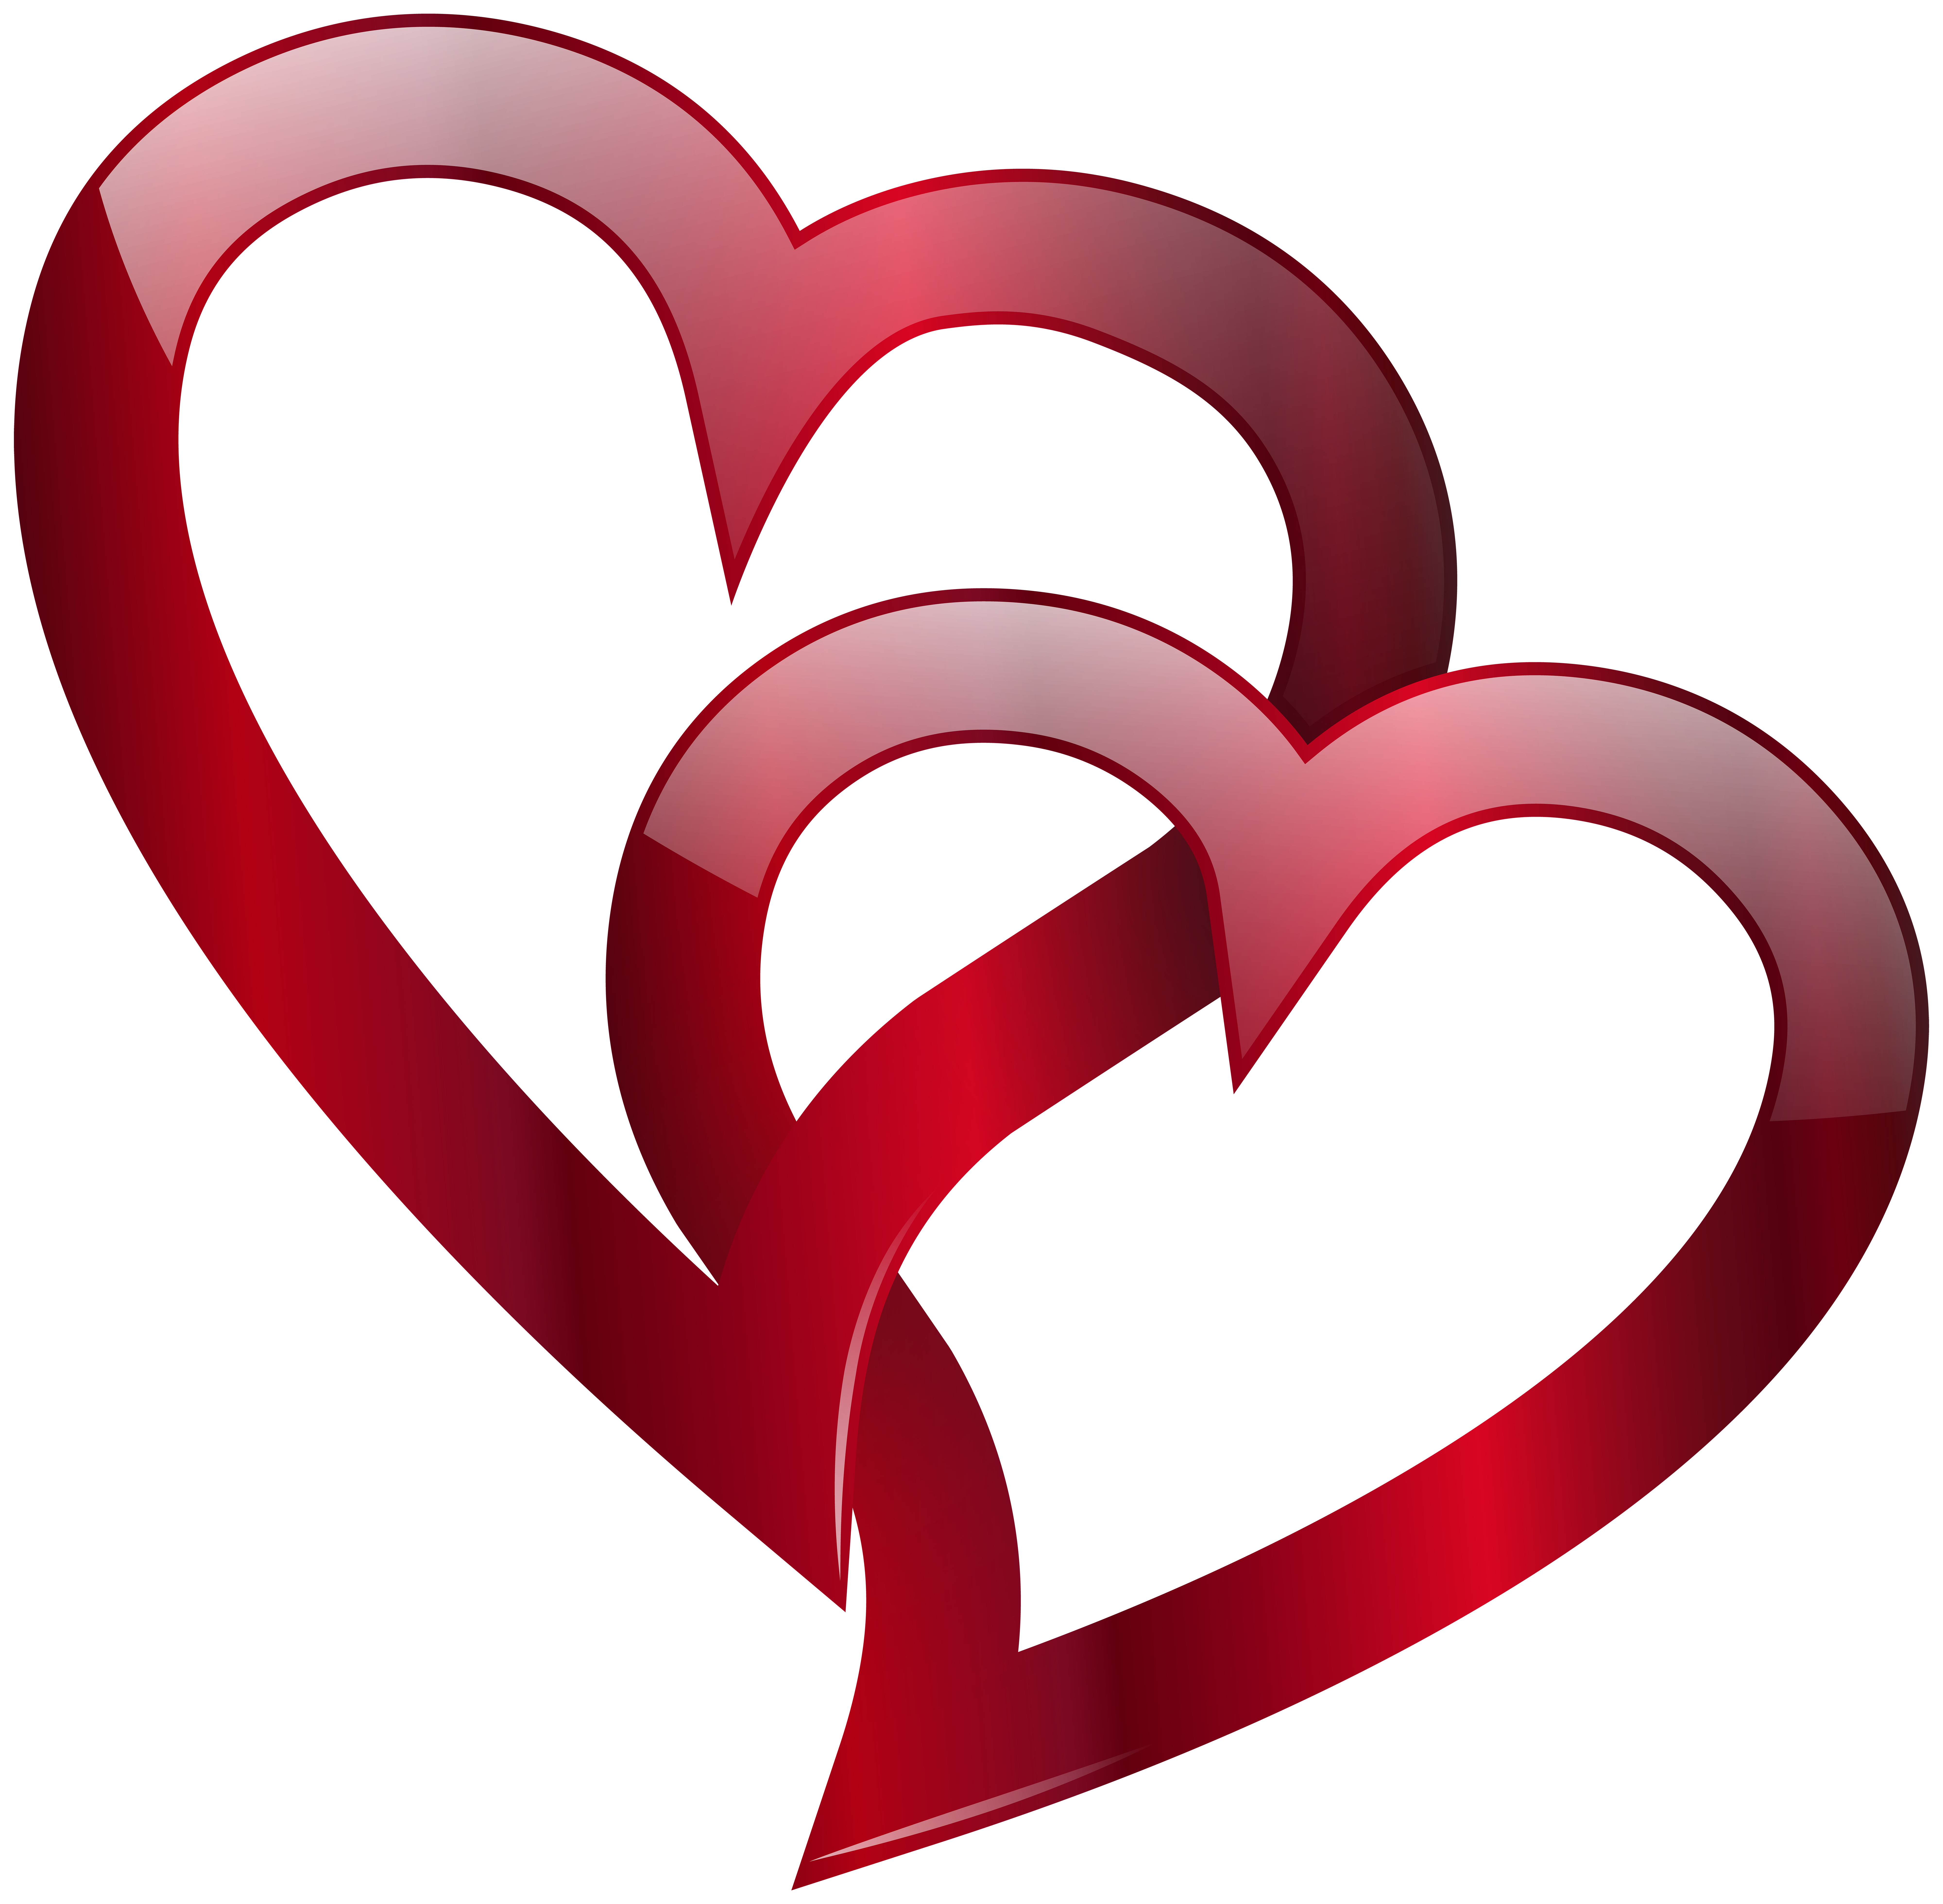 Red Double Heart Png Clip Art Image Gallery Yopriceville High Quality Free Images And Transparent Png Clipart